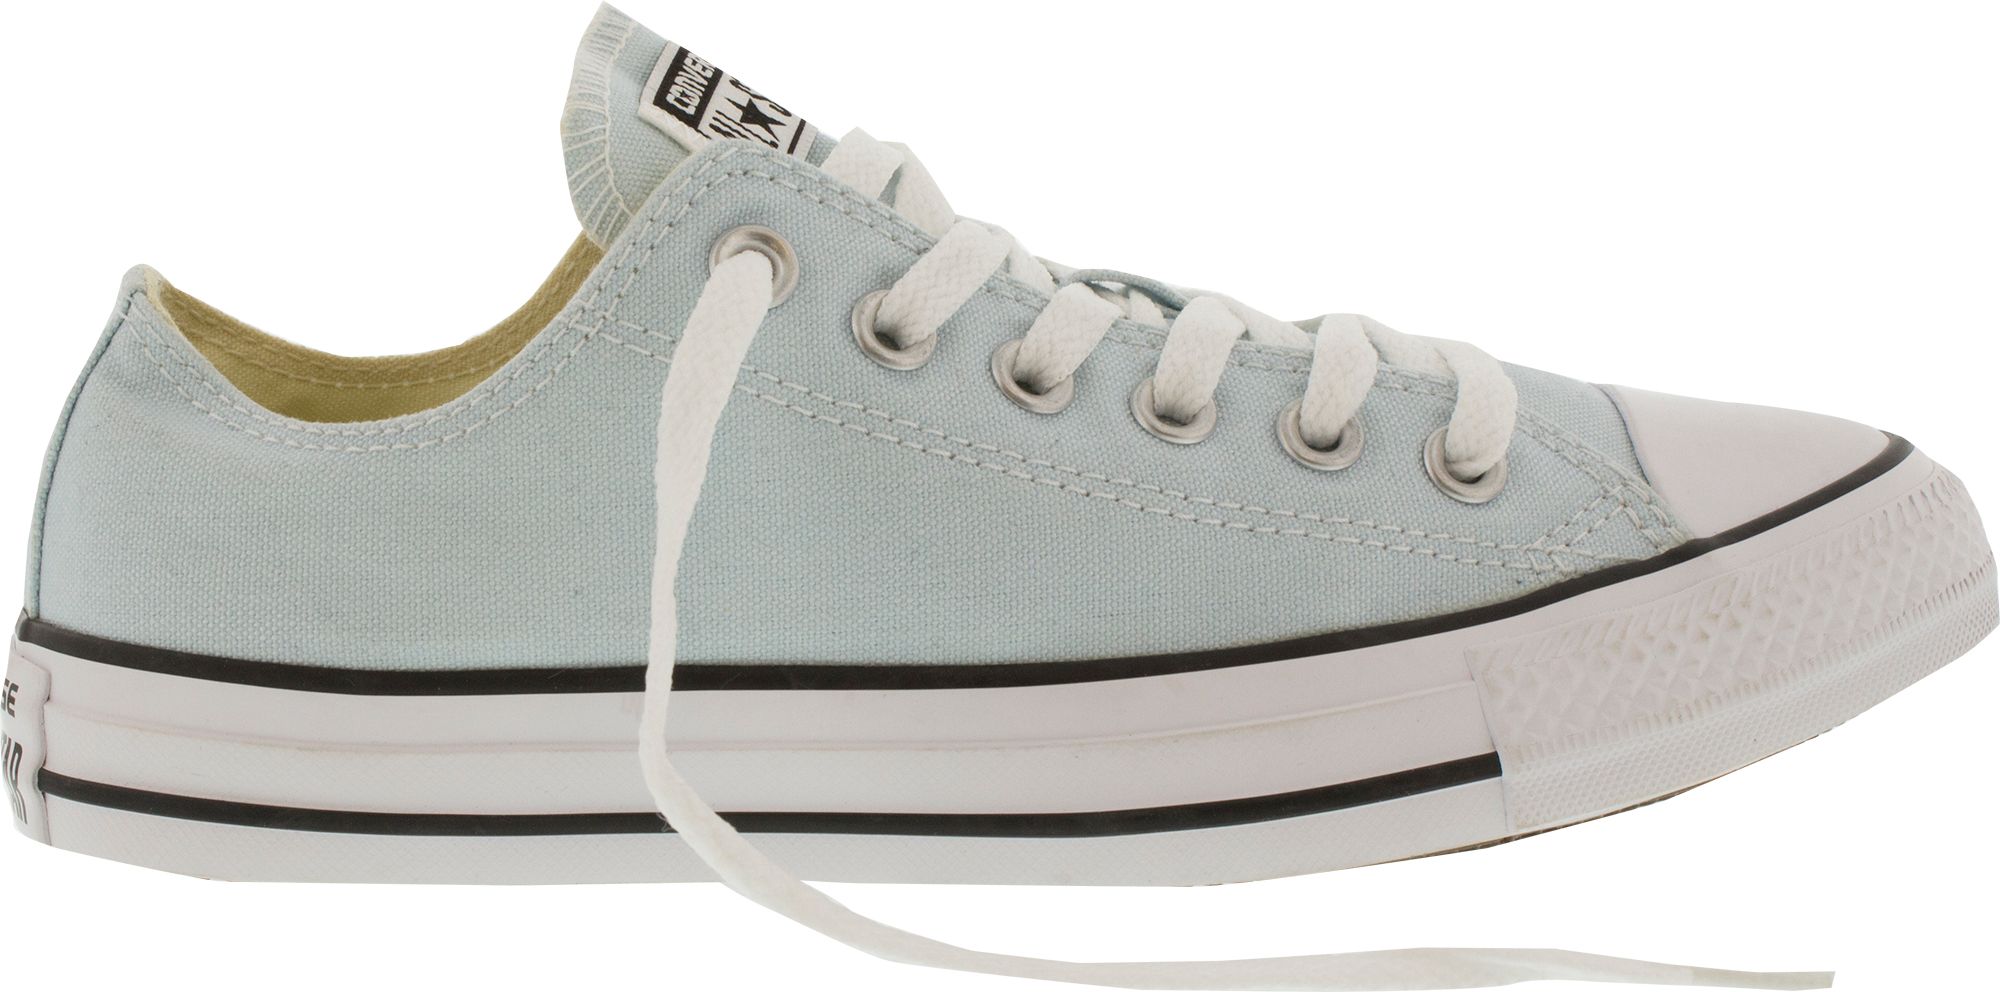 converse low top shoes